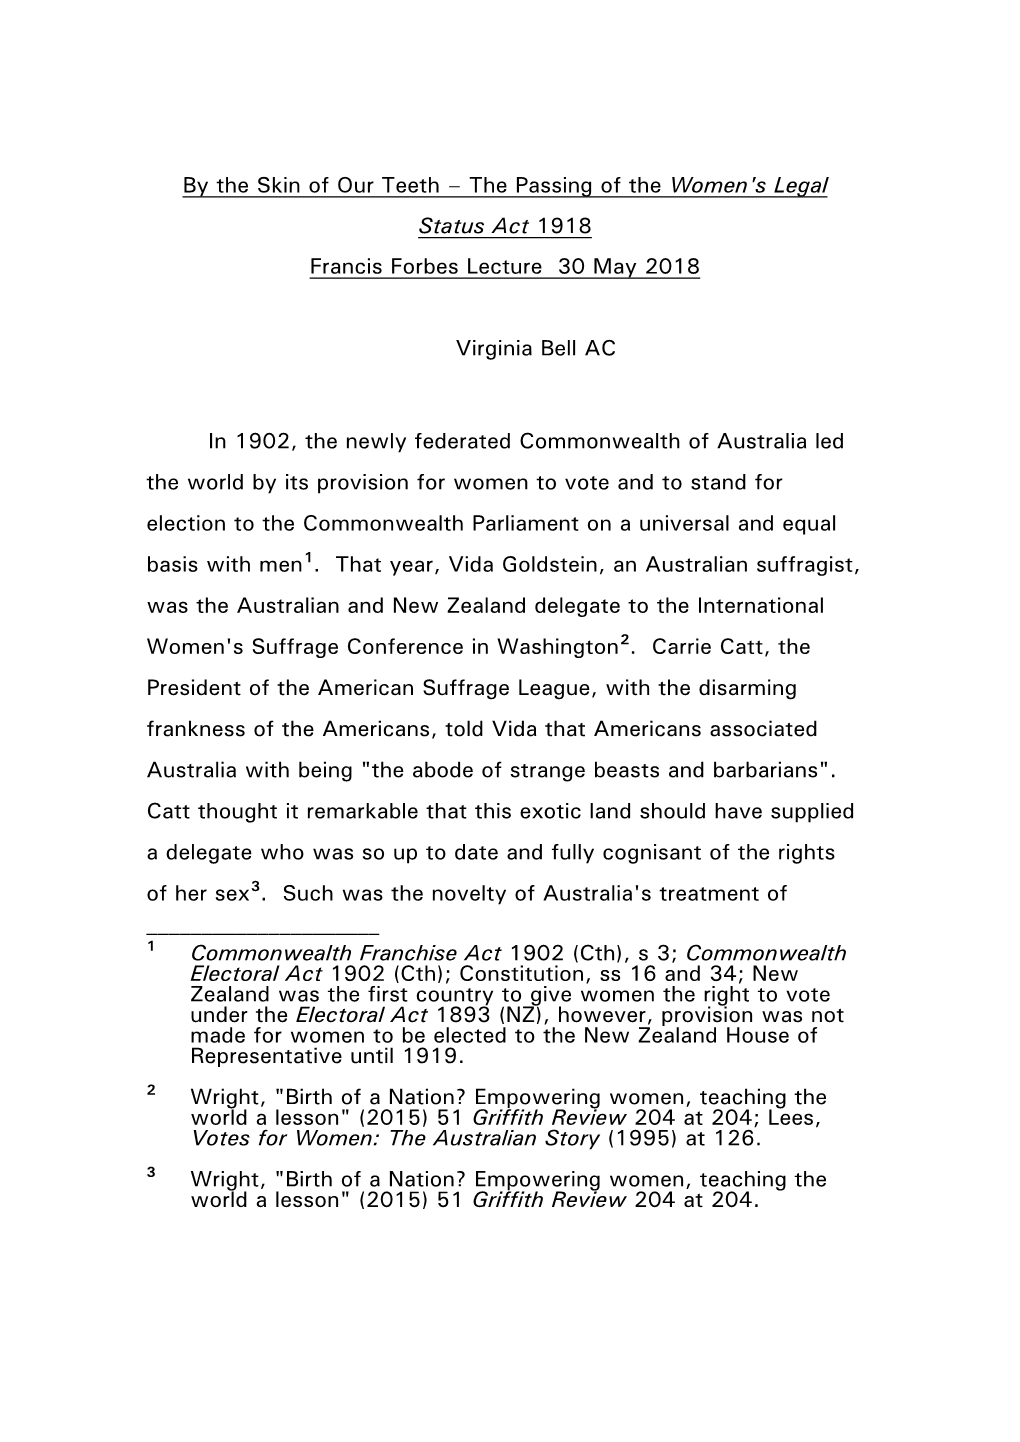 The Passing of the Women's Legal Status Act 1918 Francis Forbes Lecture 30 May 2018